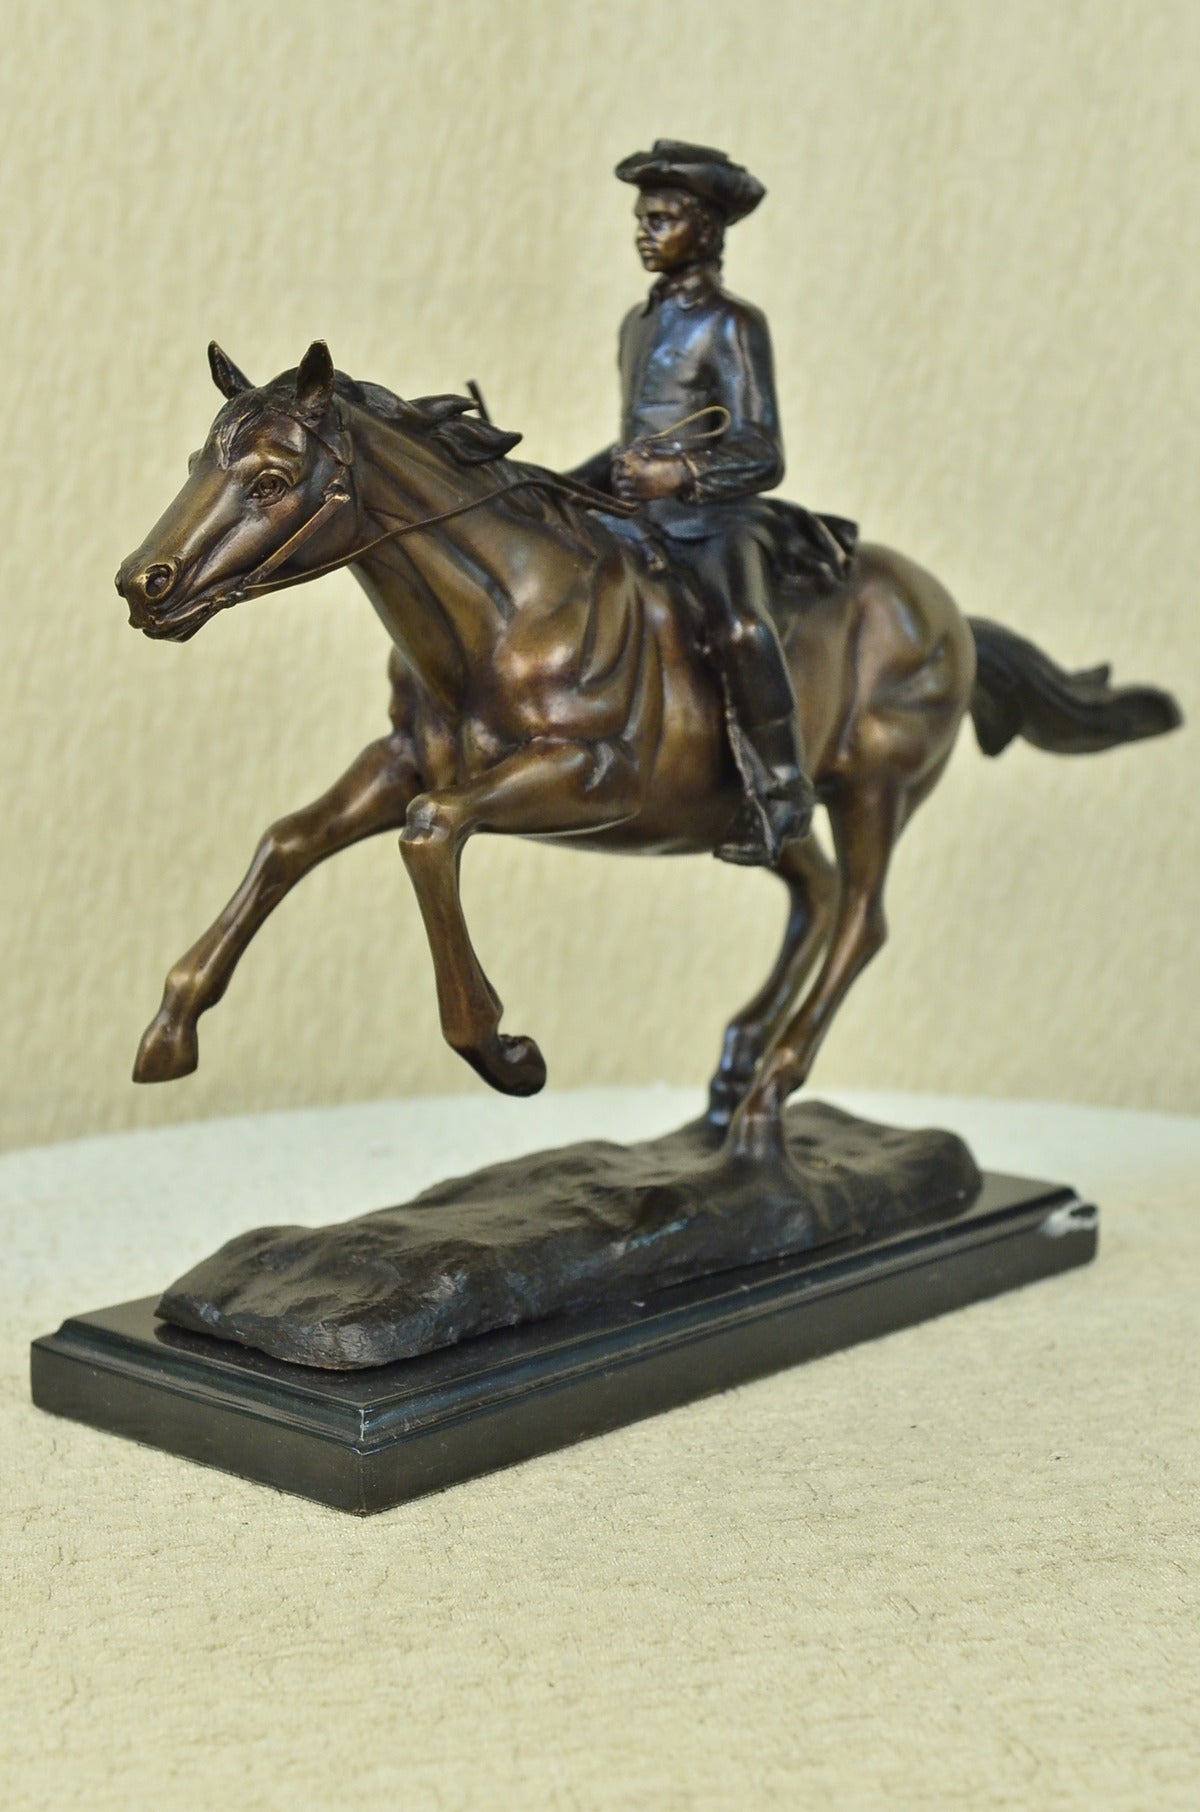 Handcrafted bronze sculpture SALE Marble Horse On Soldier French Mene Pj Signed